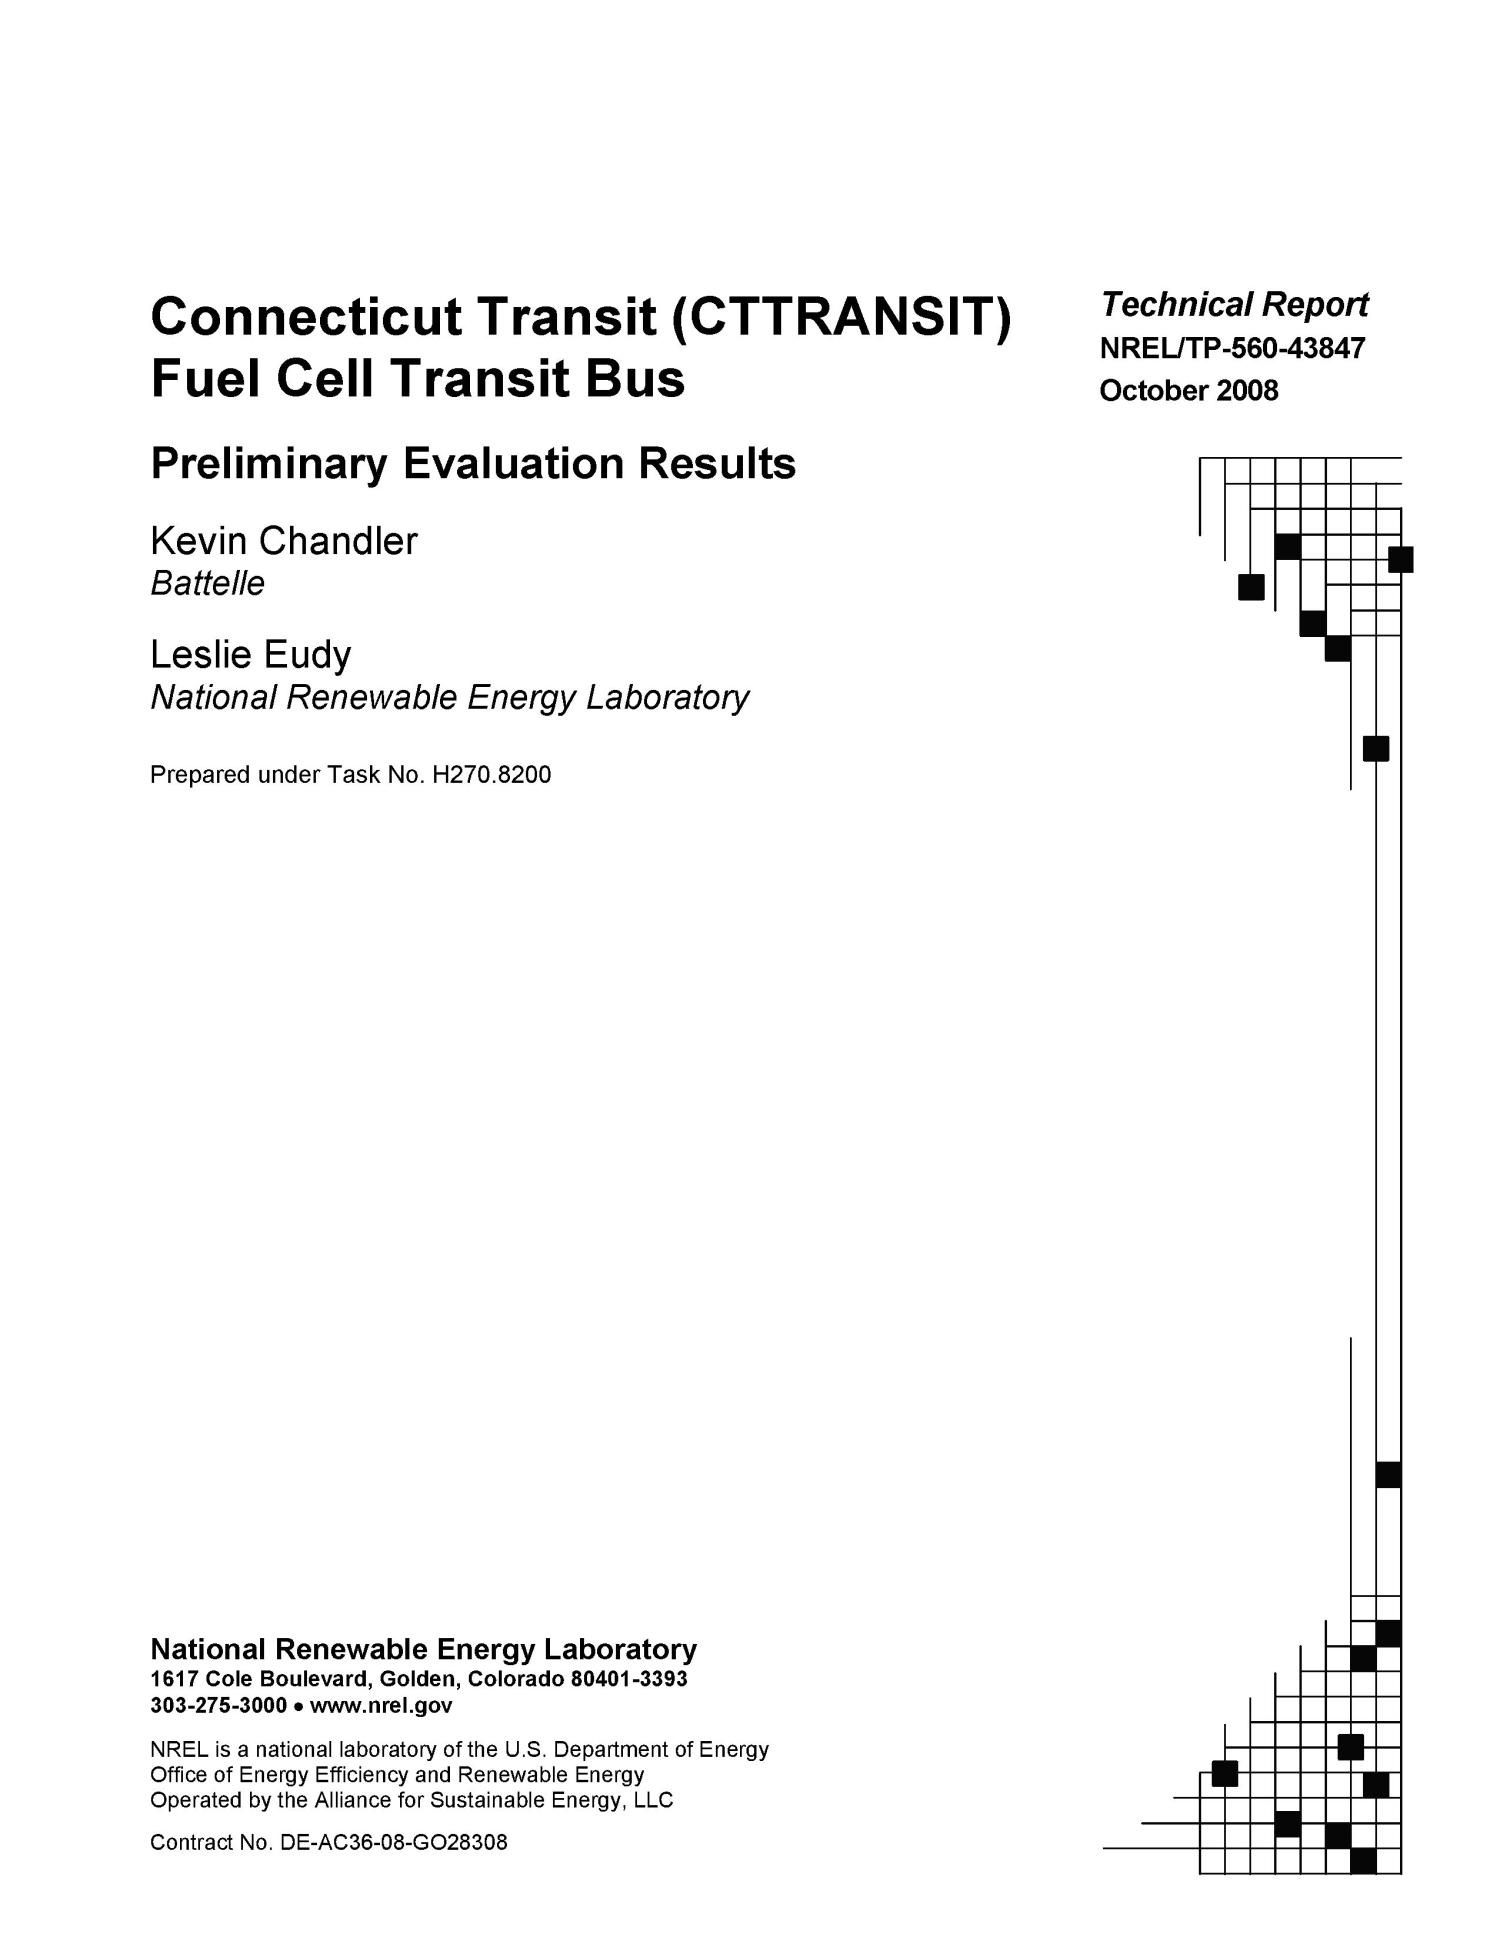 Connecticut Transit (CTTRANSIT) Fuel Cell Transit Bus: Preliminary Evaluation Results
                                                
                                                    [Sequence #]: 2 of 46
                                                